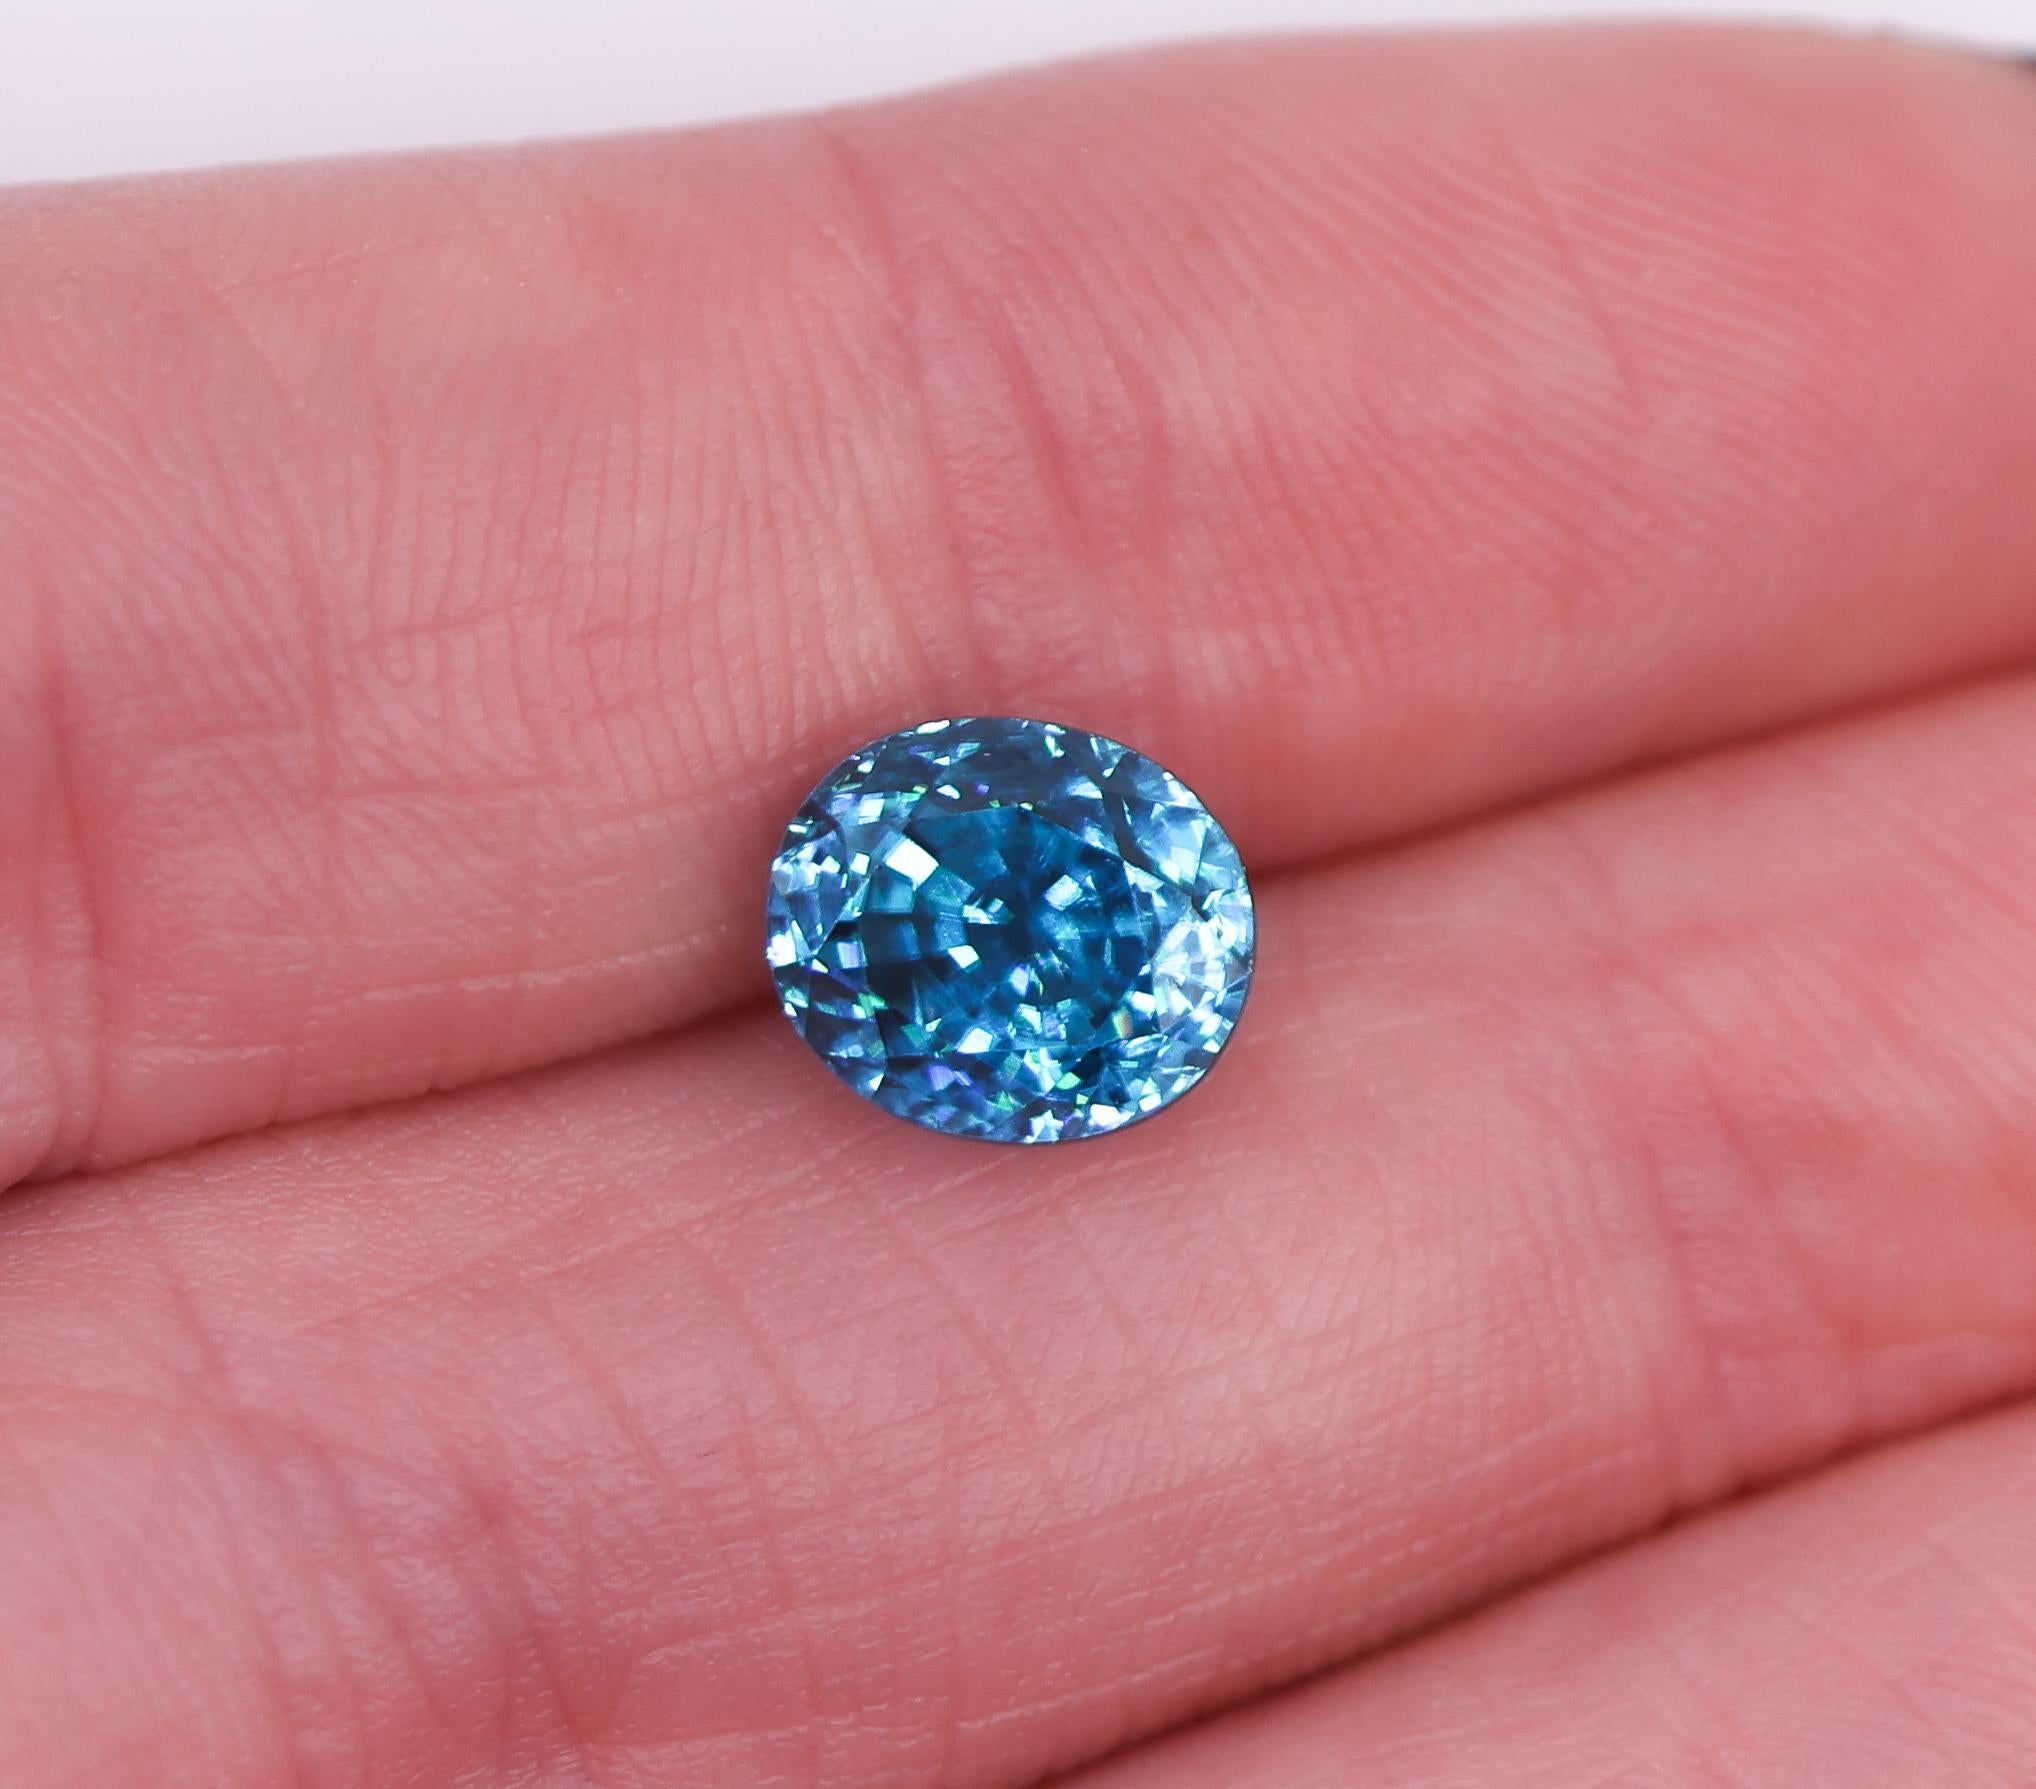 A gorgeous oval shape blue zircon looking for it's next home. If you feel a sparkle of excitement seeing this gem and want to design a one of a kind piece of jewelry, let us know!

Cambodian Zircon is the perfect eco-friendly alternative to